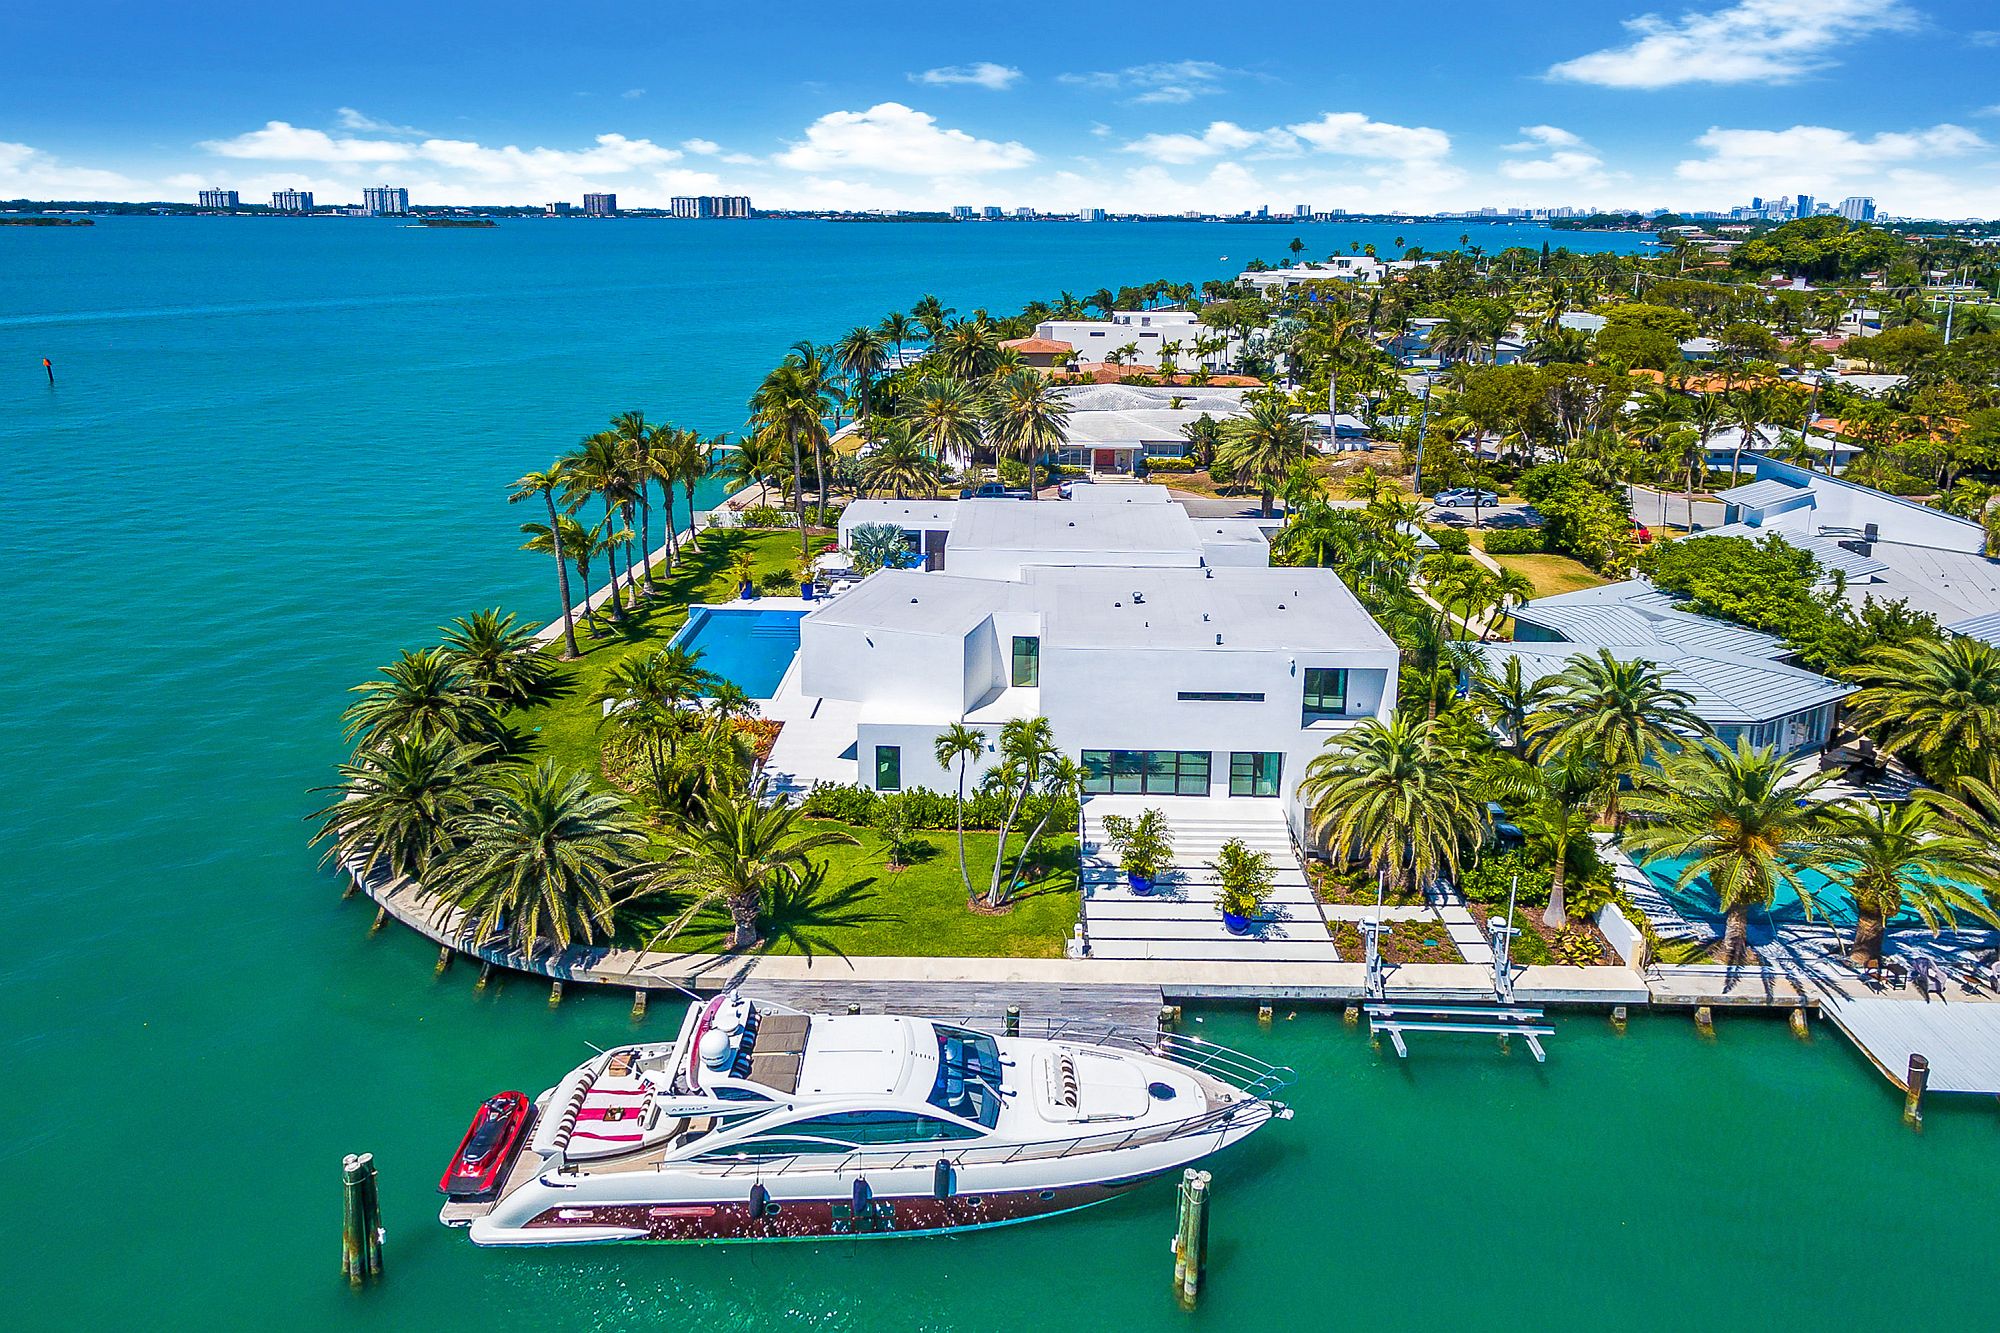 Access to 300 feet of unobstructed bay area at the lavish Miami home